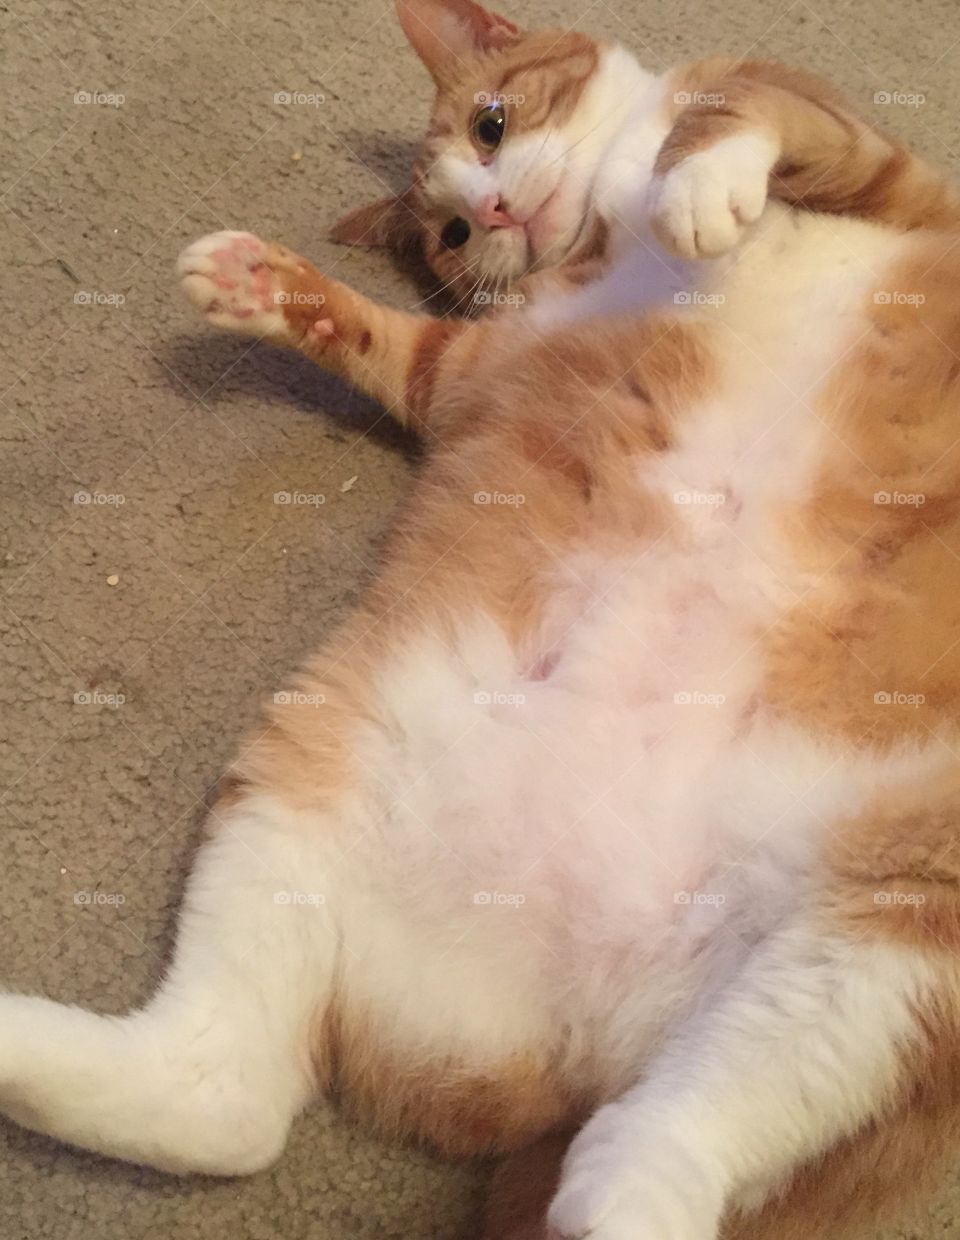 Minnie showing her fluffy belly.